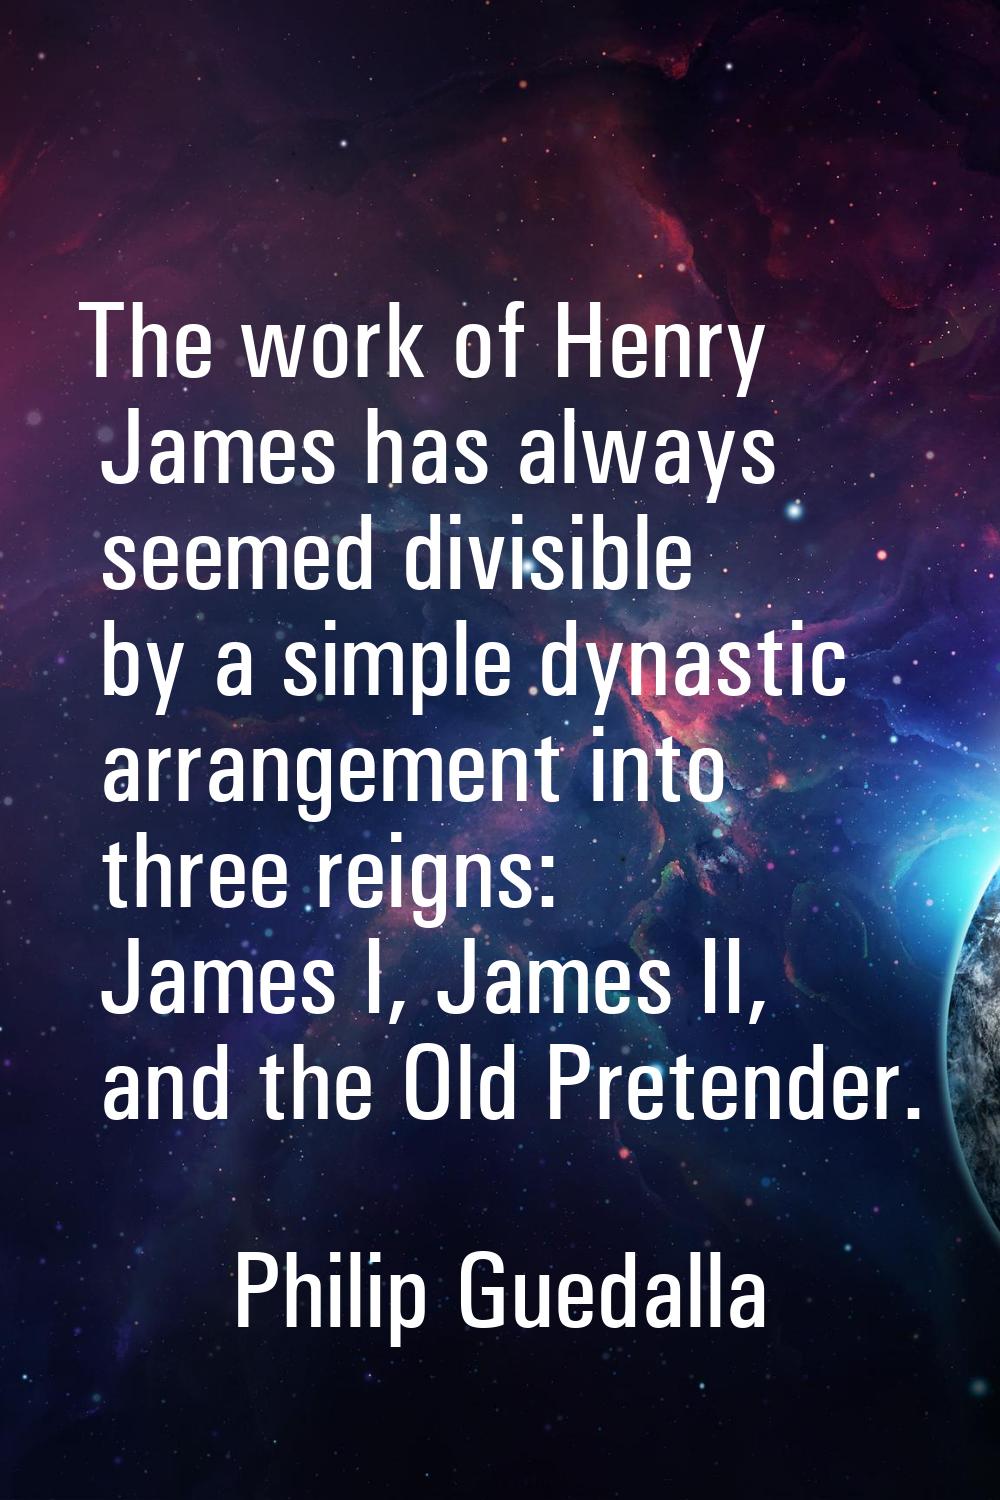 The work of Henry James has always seemed divisible by a simple dynastic arrangement into three rei